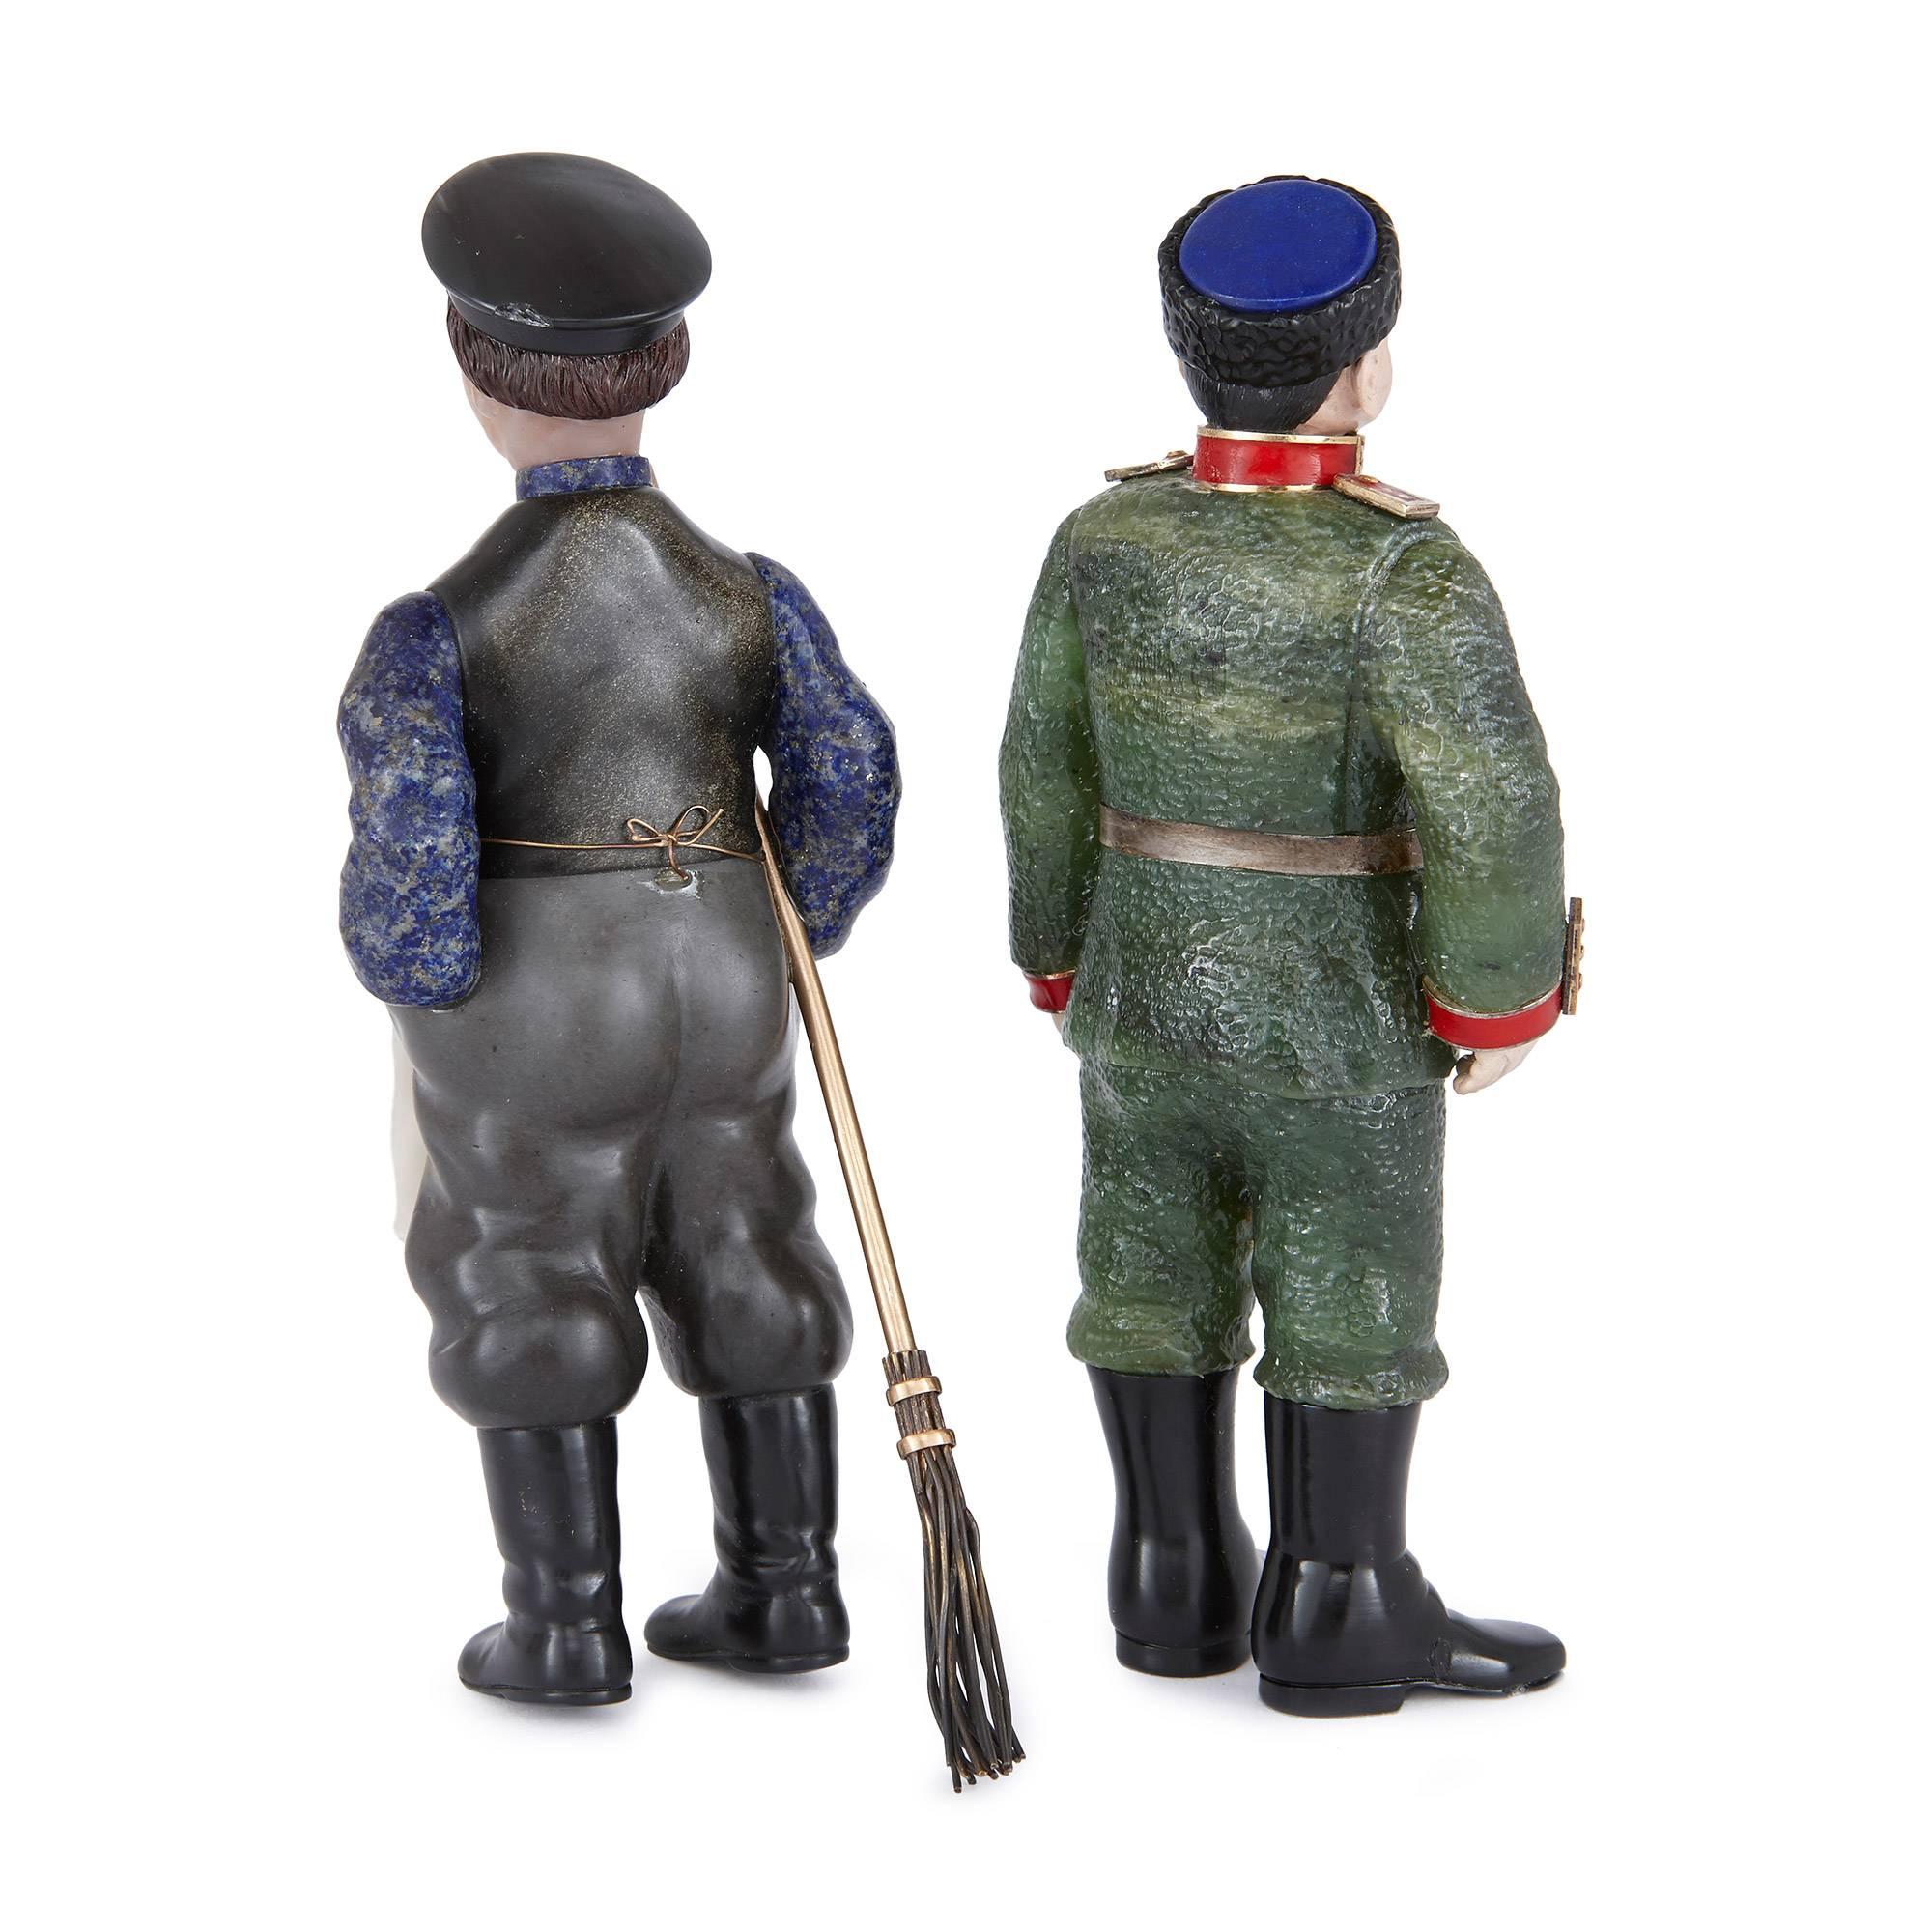 One figure in a blue uniform with a black peaked cap, holding a broom; the other figure in a Soviet style soldier's uniform with a fur hat.

These charming Russian figures are carefully crafted from precious hardstones in the Fabergé style, making